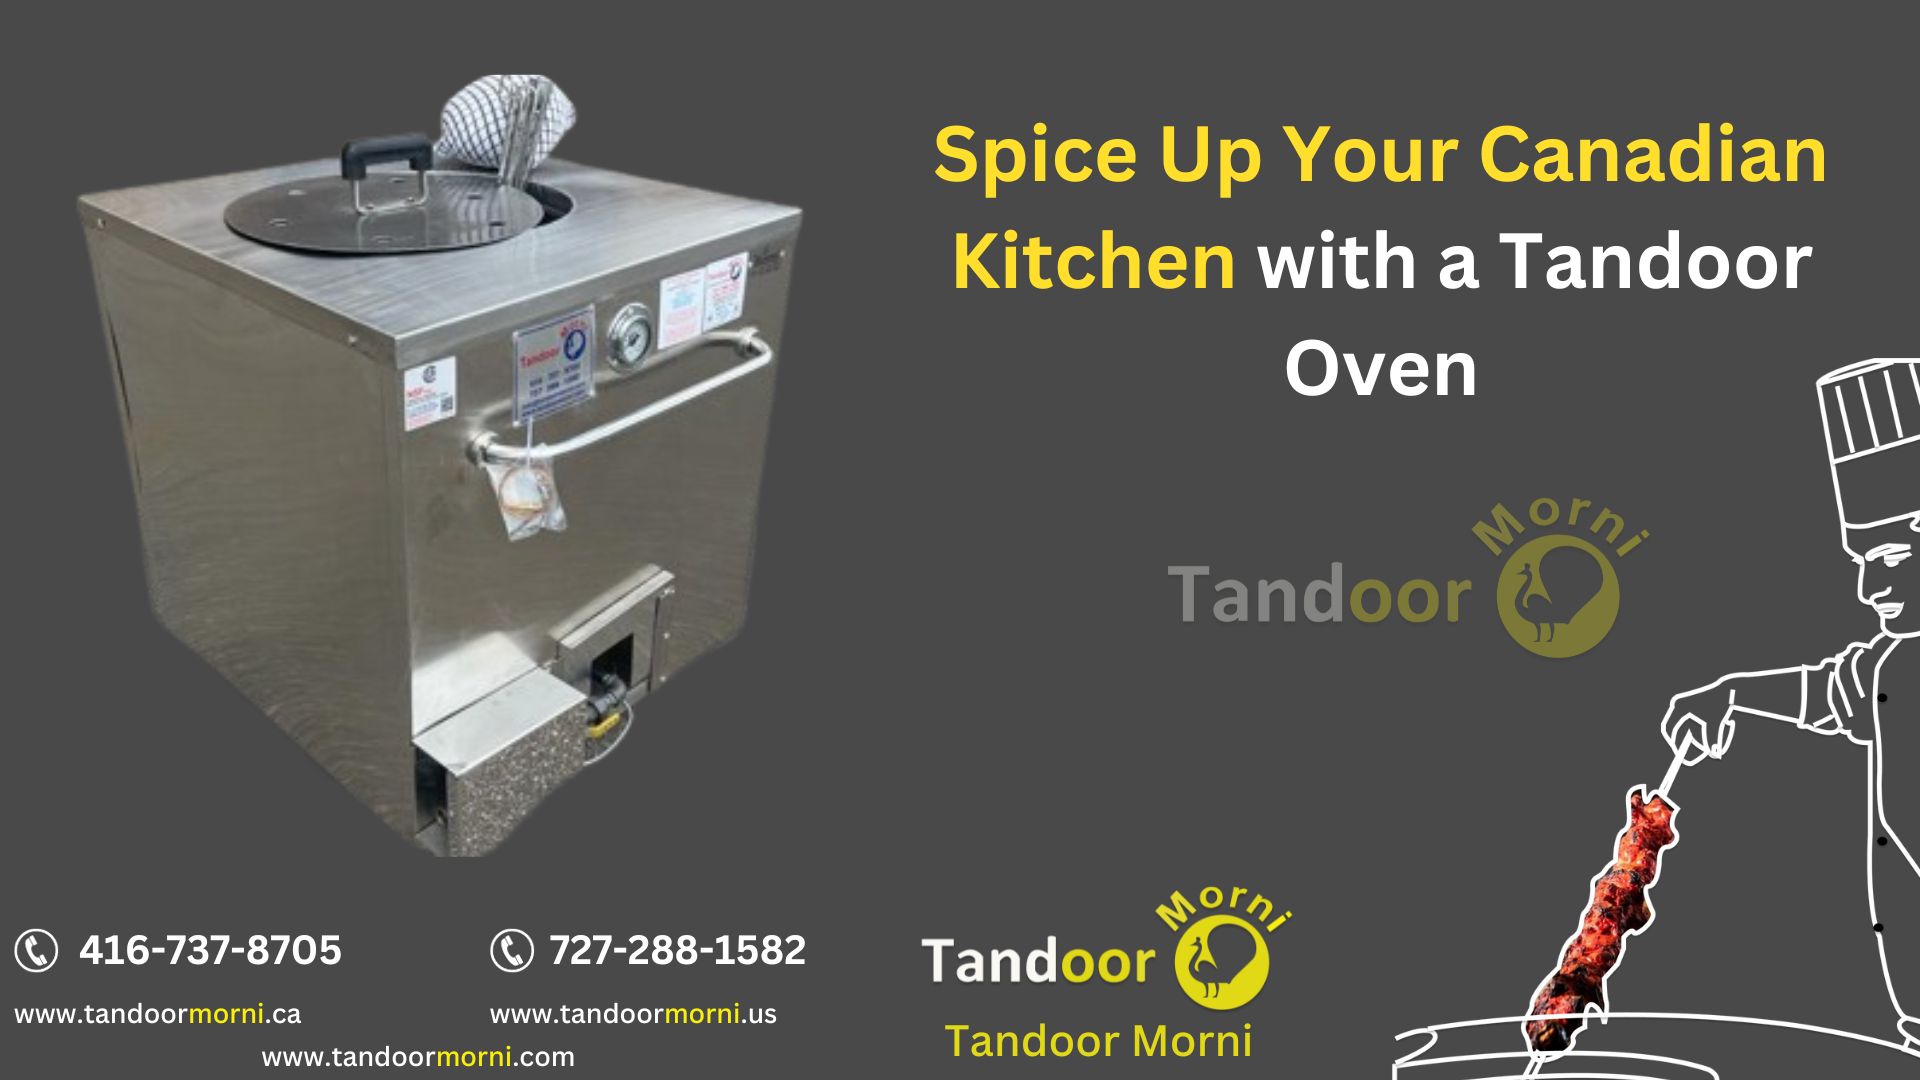 10 Tips for Choosing the Right Tandoori Oven in Canada